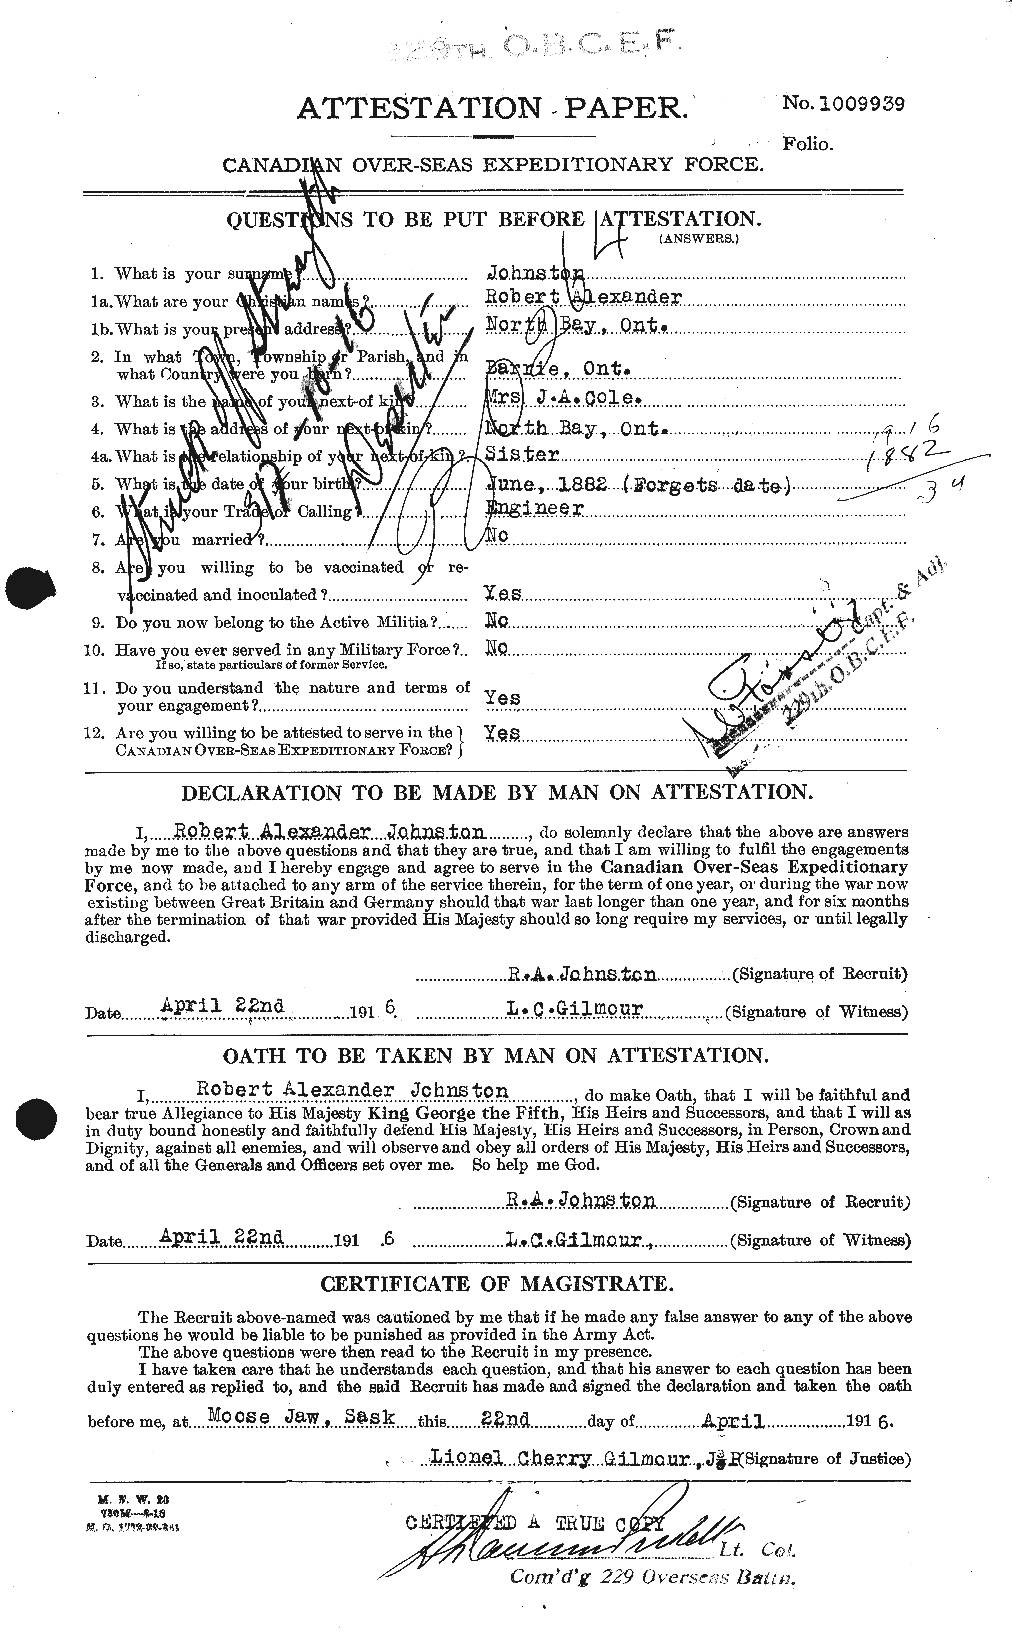 Personnel Records of the First World War - CEF 427000a